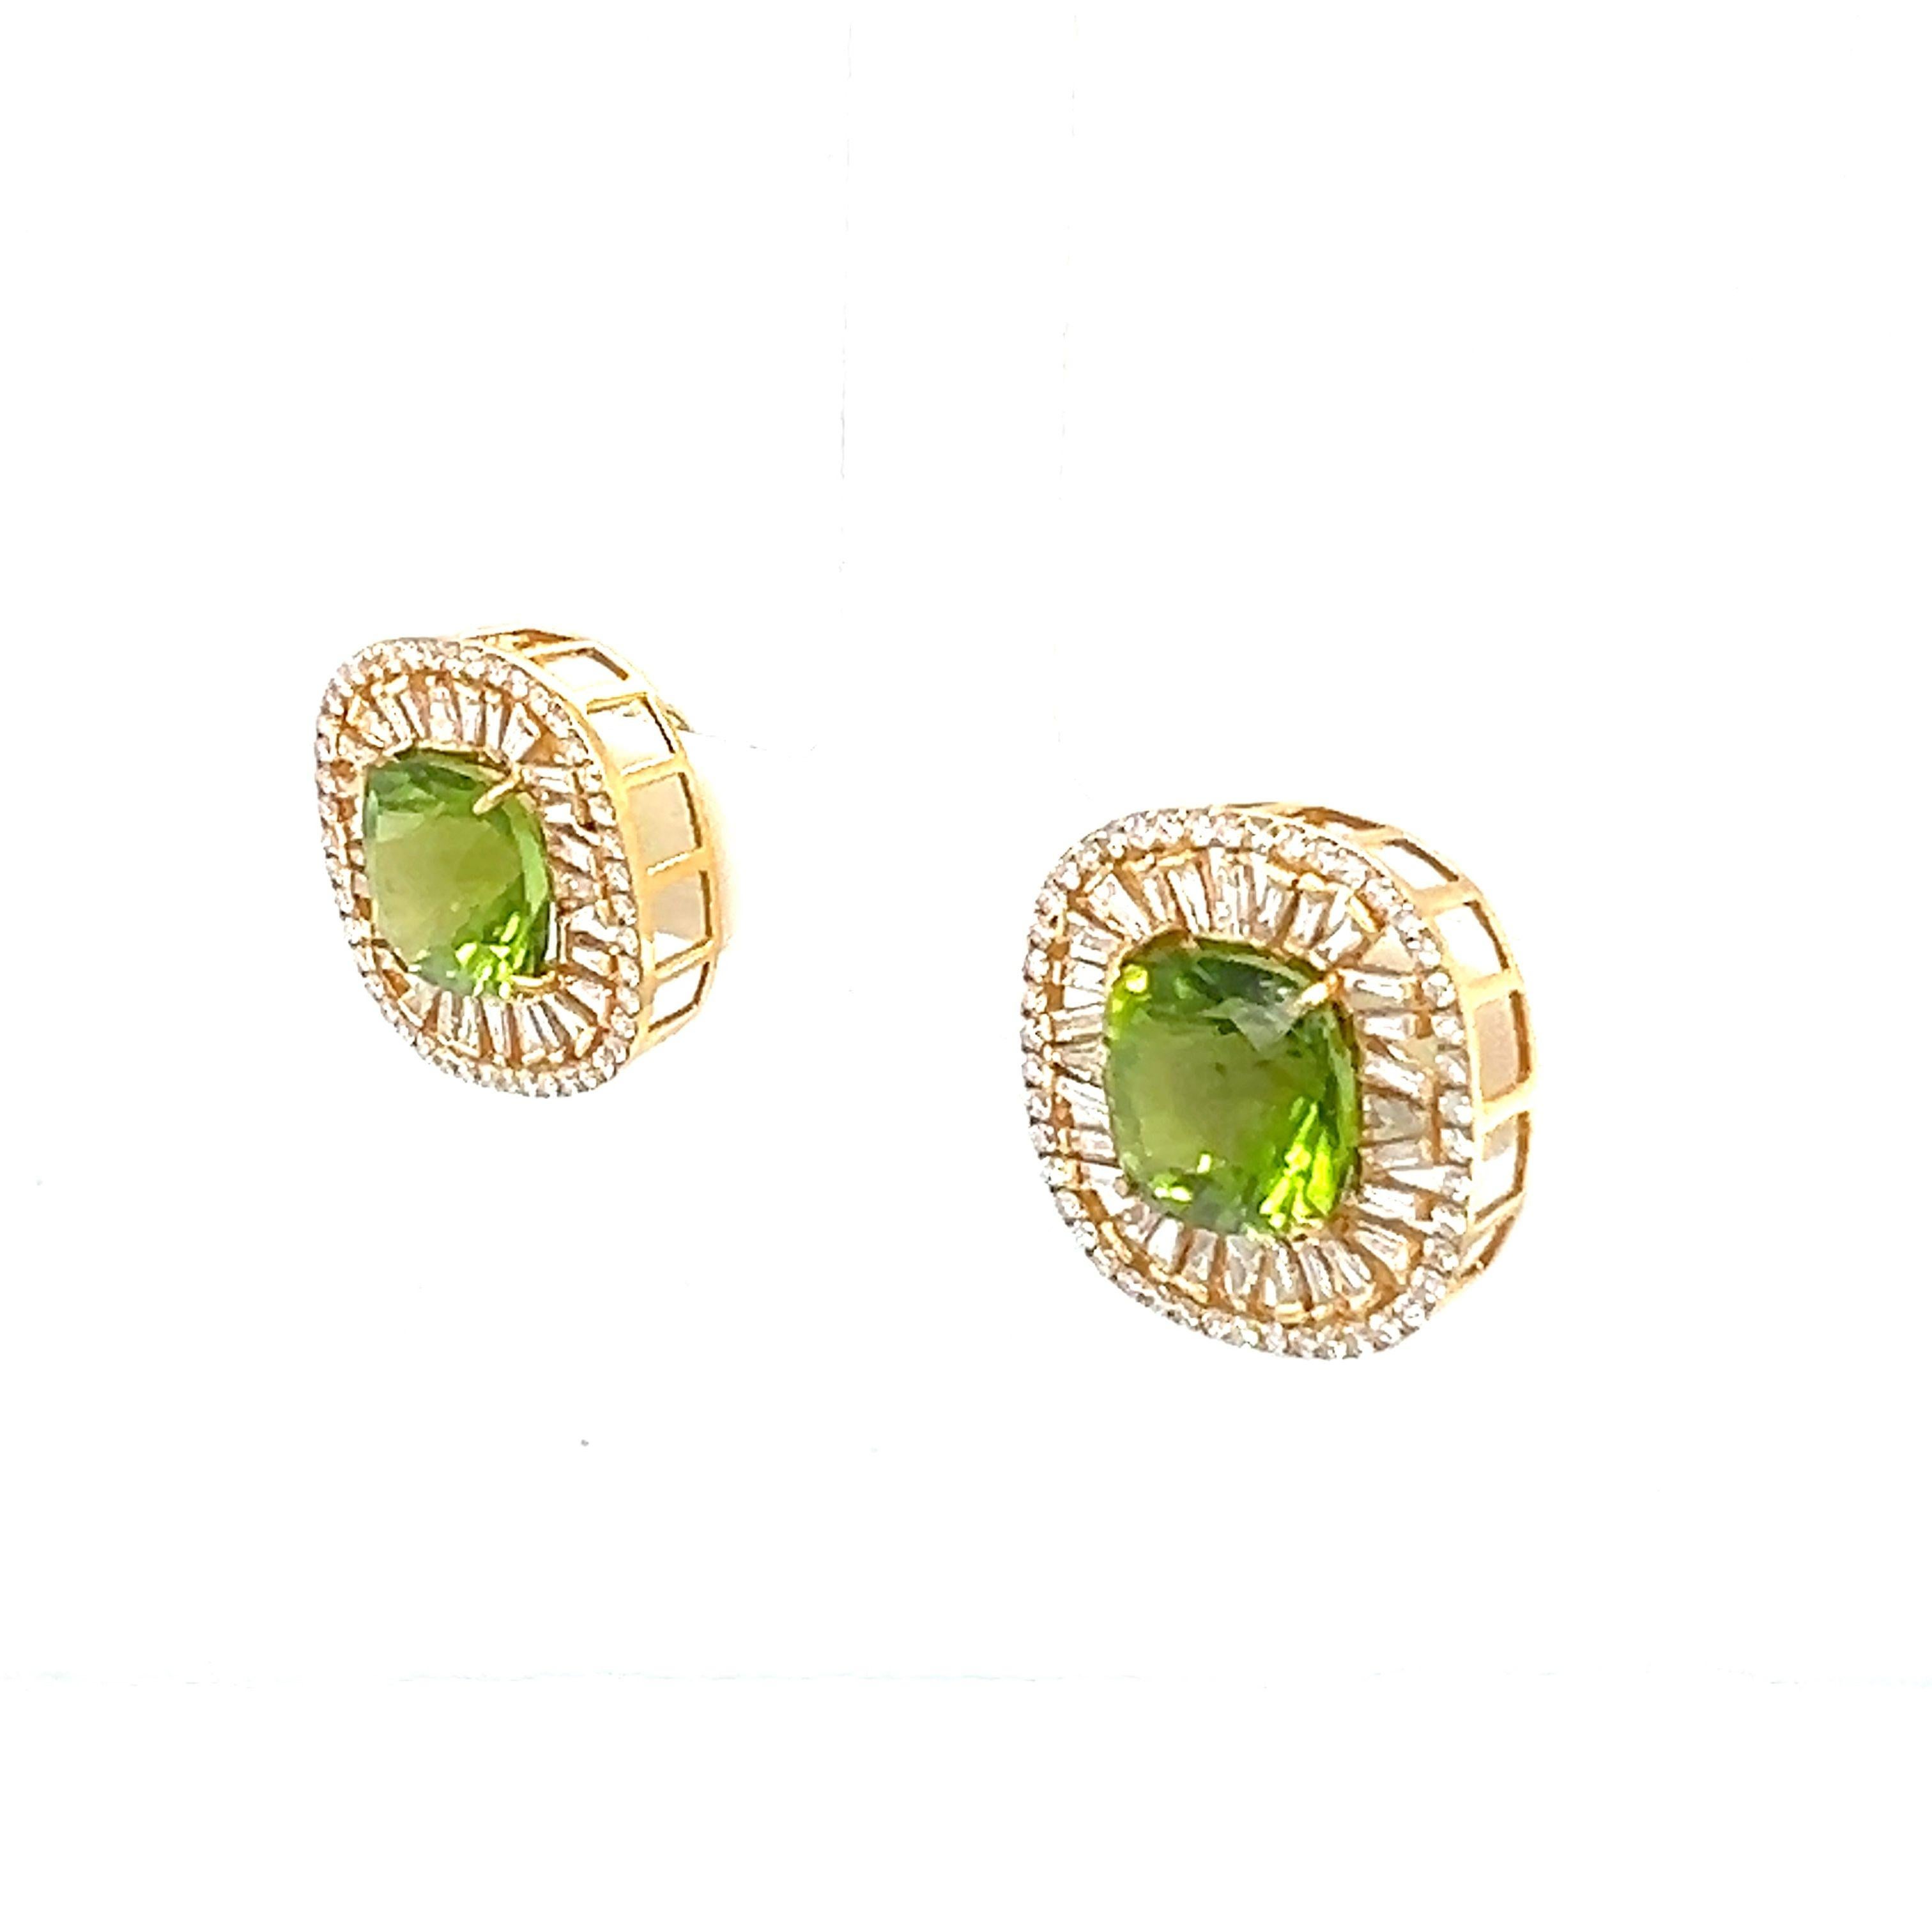 A stunning pair of 18-Kt yellow gold stud earrings are feature with natural 9.80-carat Peridot and 1.48-carat diamonds. 